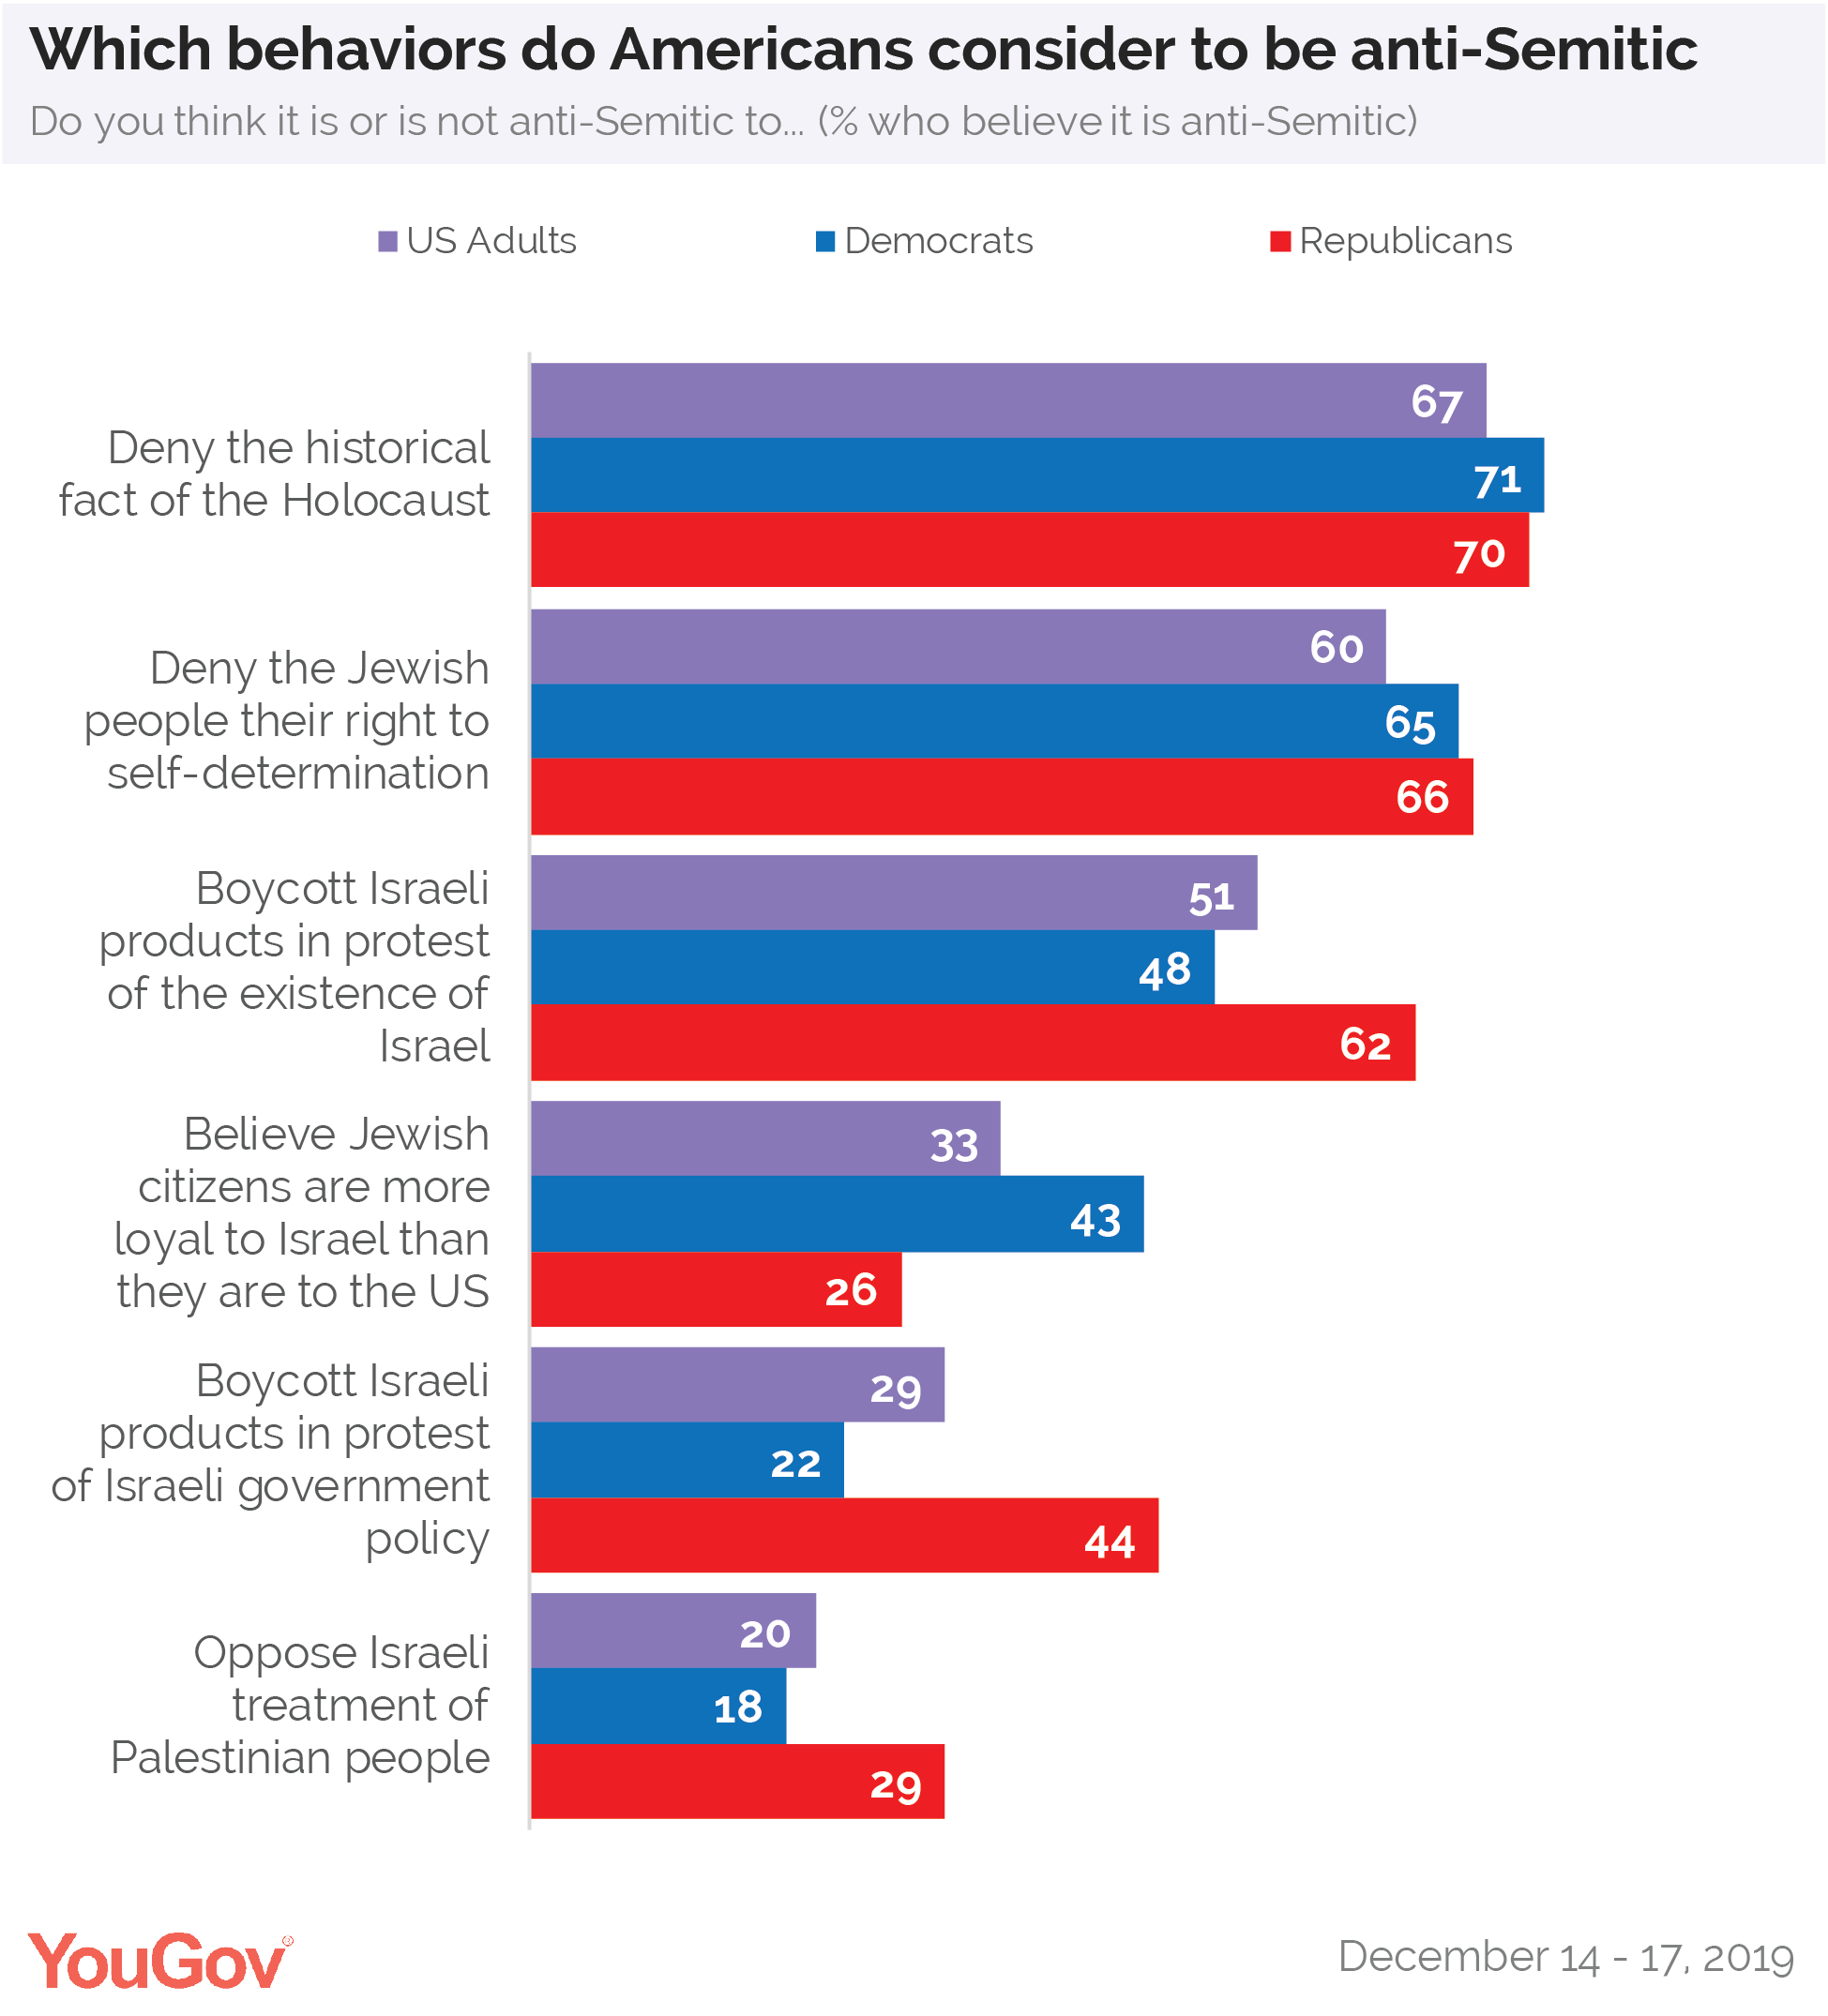 Image from article; white background with bar graph in 3 colors, Independent, Democrat, Republican and on the left side questions/topics to consider "Is this antisemitic" or not? "Americans cannot agree on what behaviors are anti-Semitic" article title.